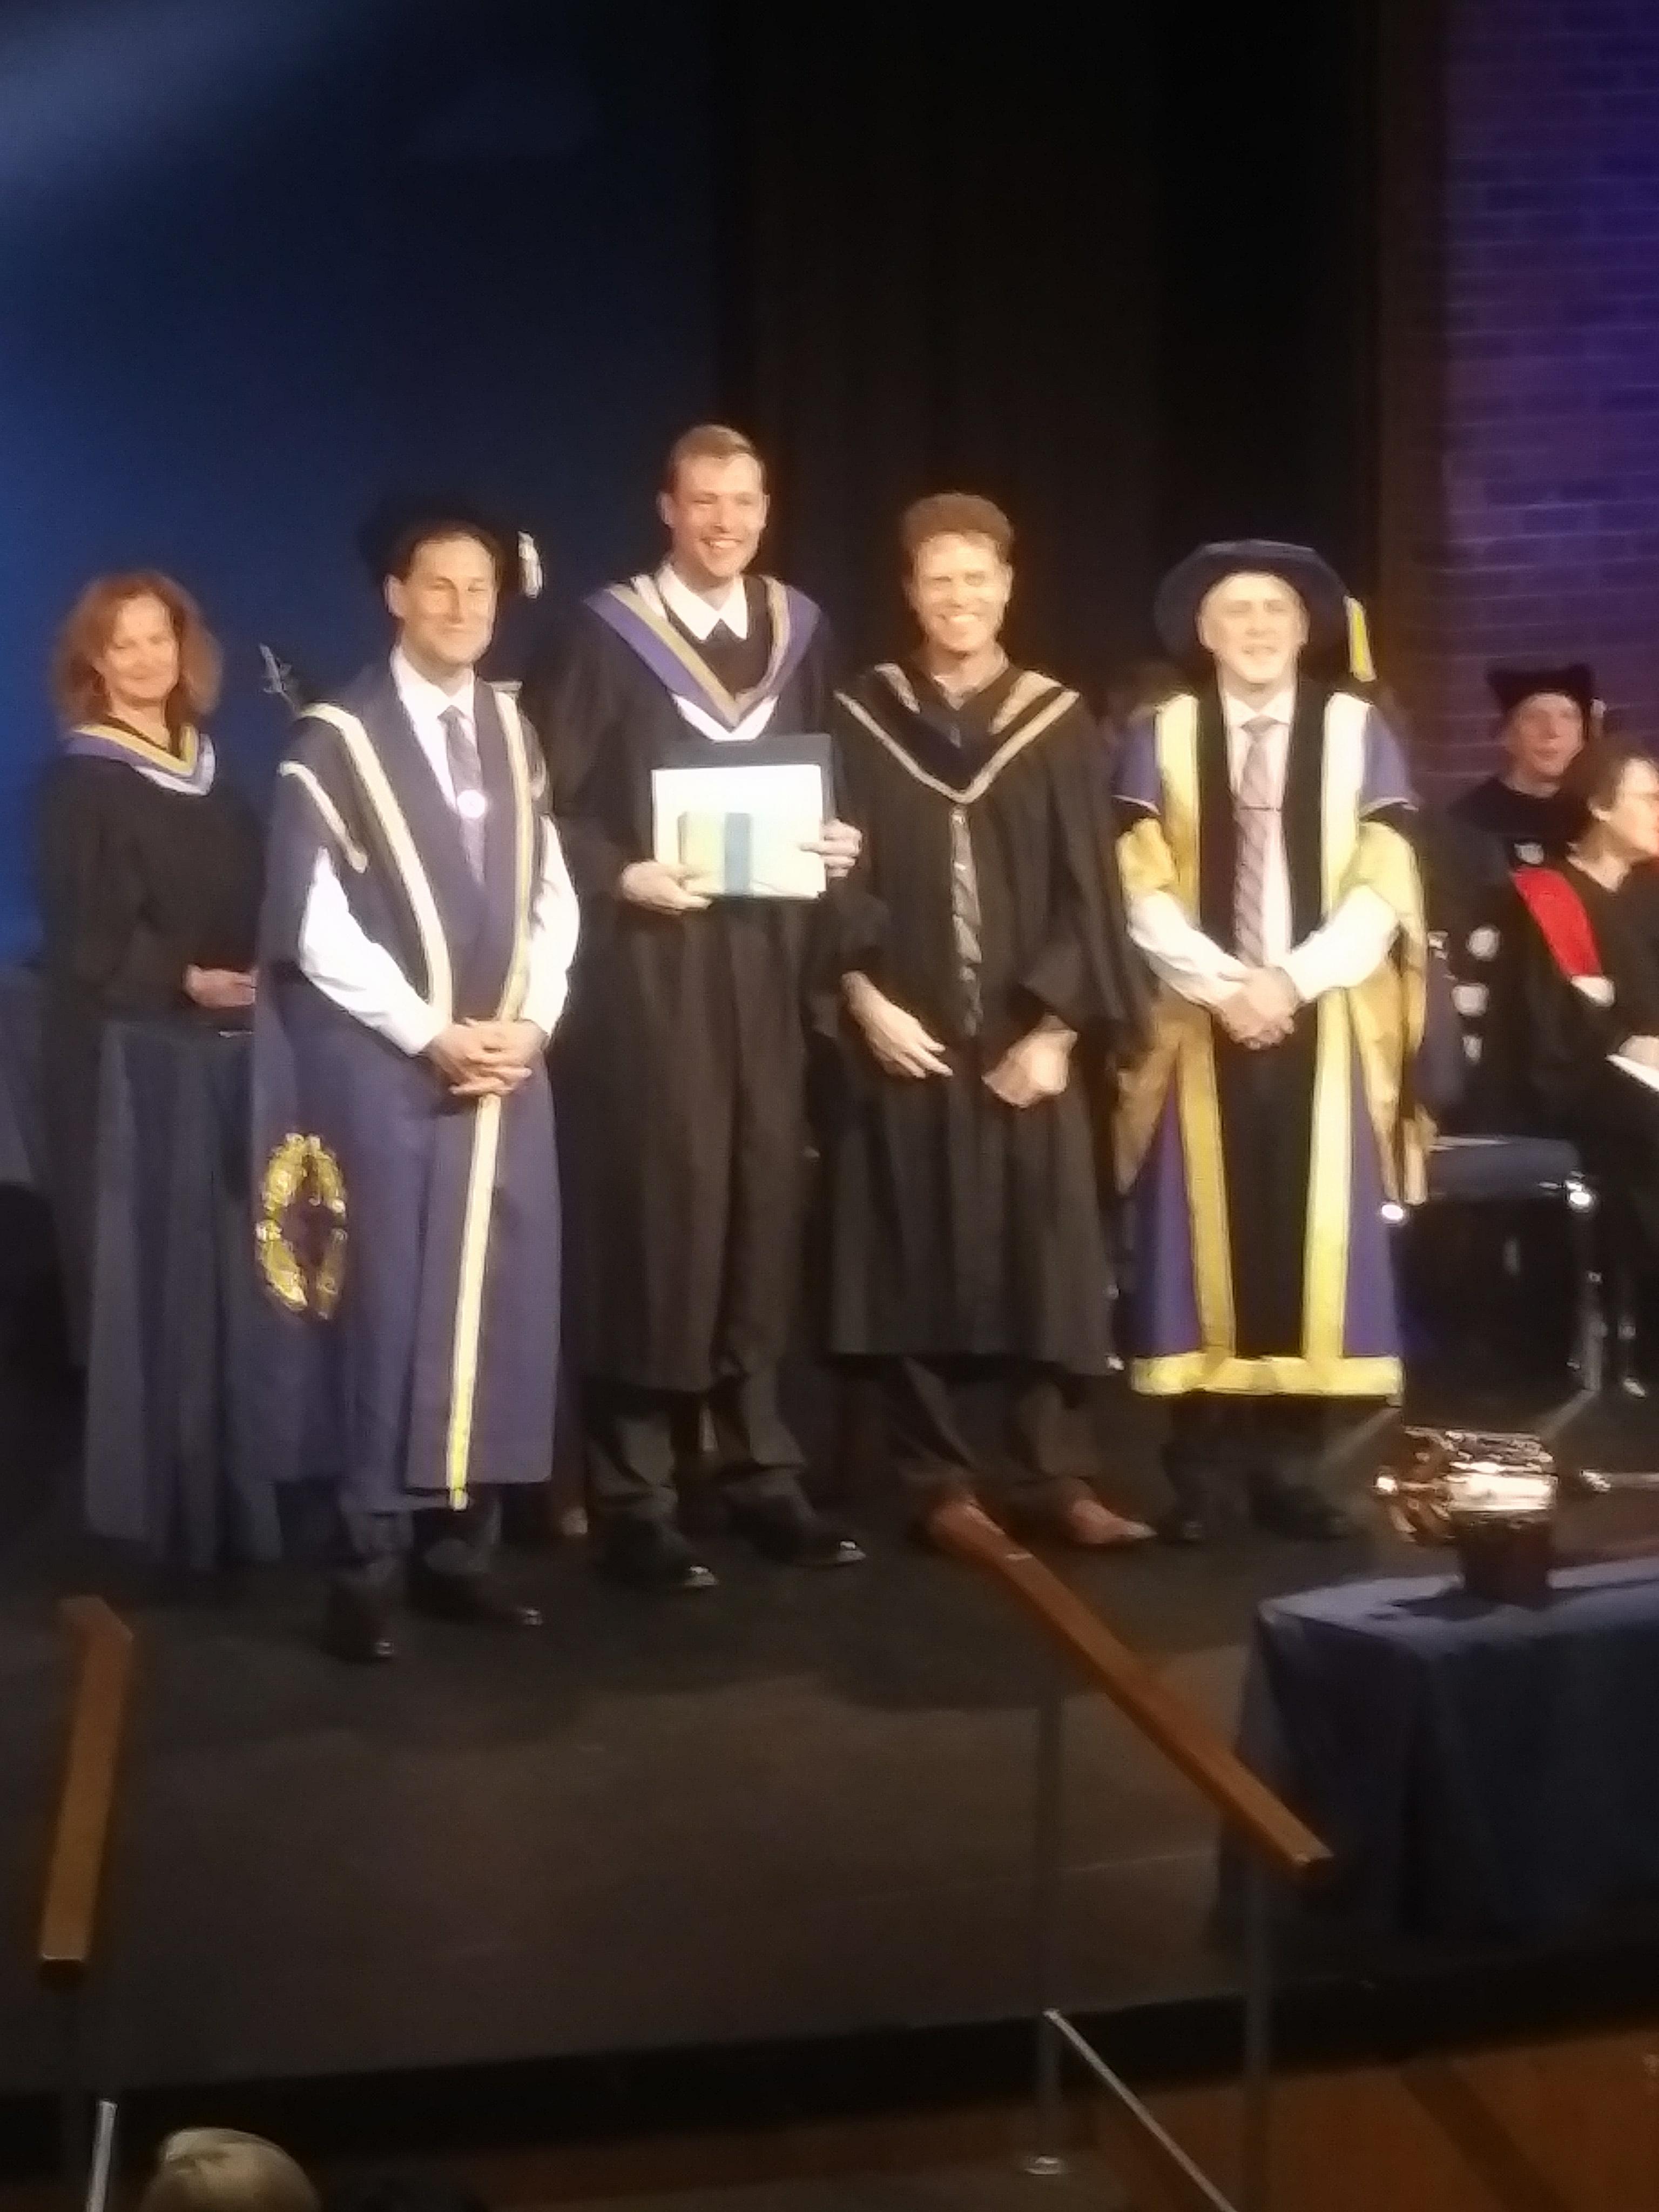 Student getting a diploma at convocation